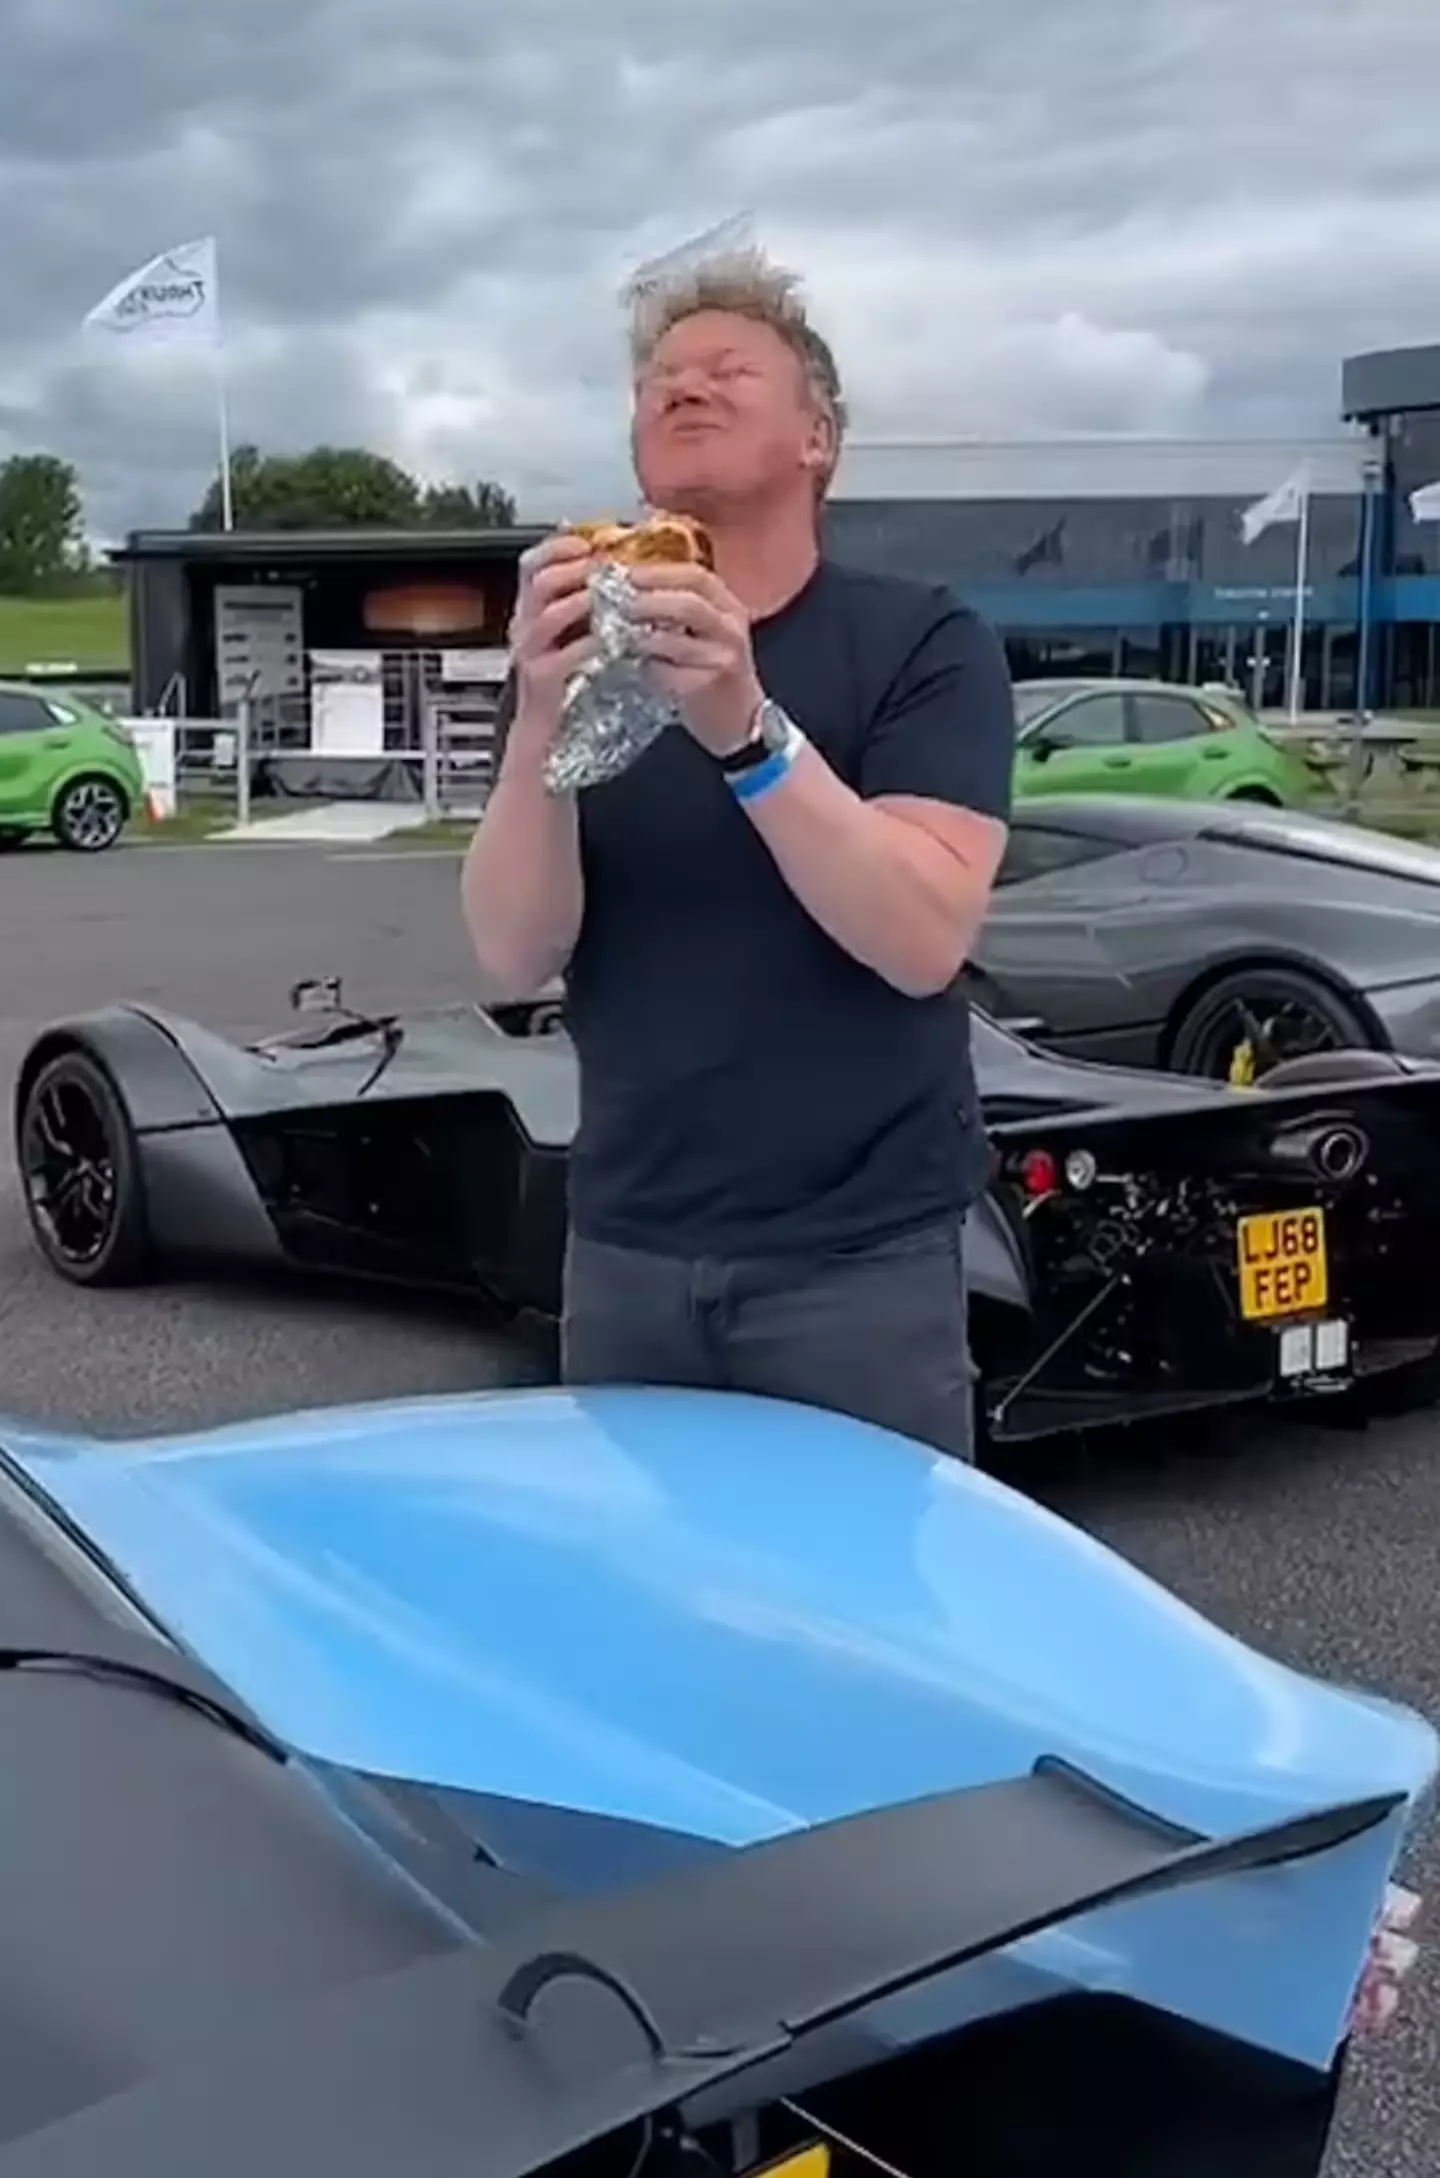 Gordon Ramsay was pretty happy with the result.